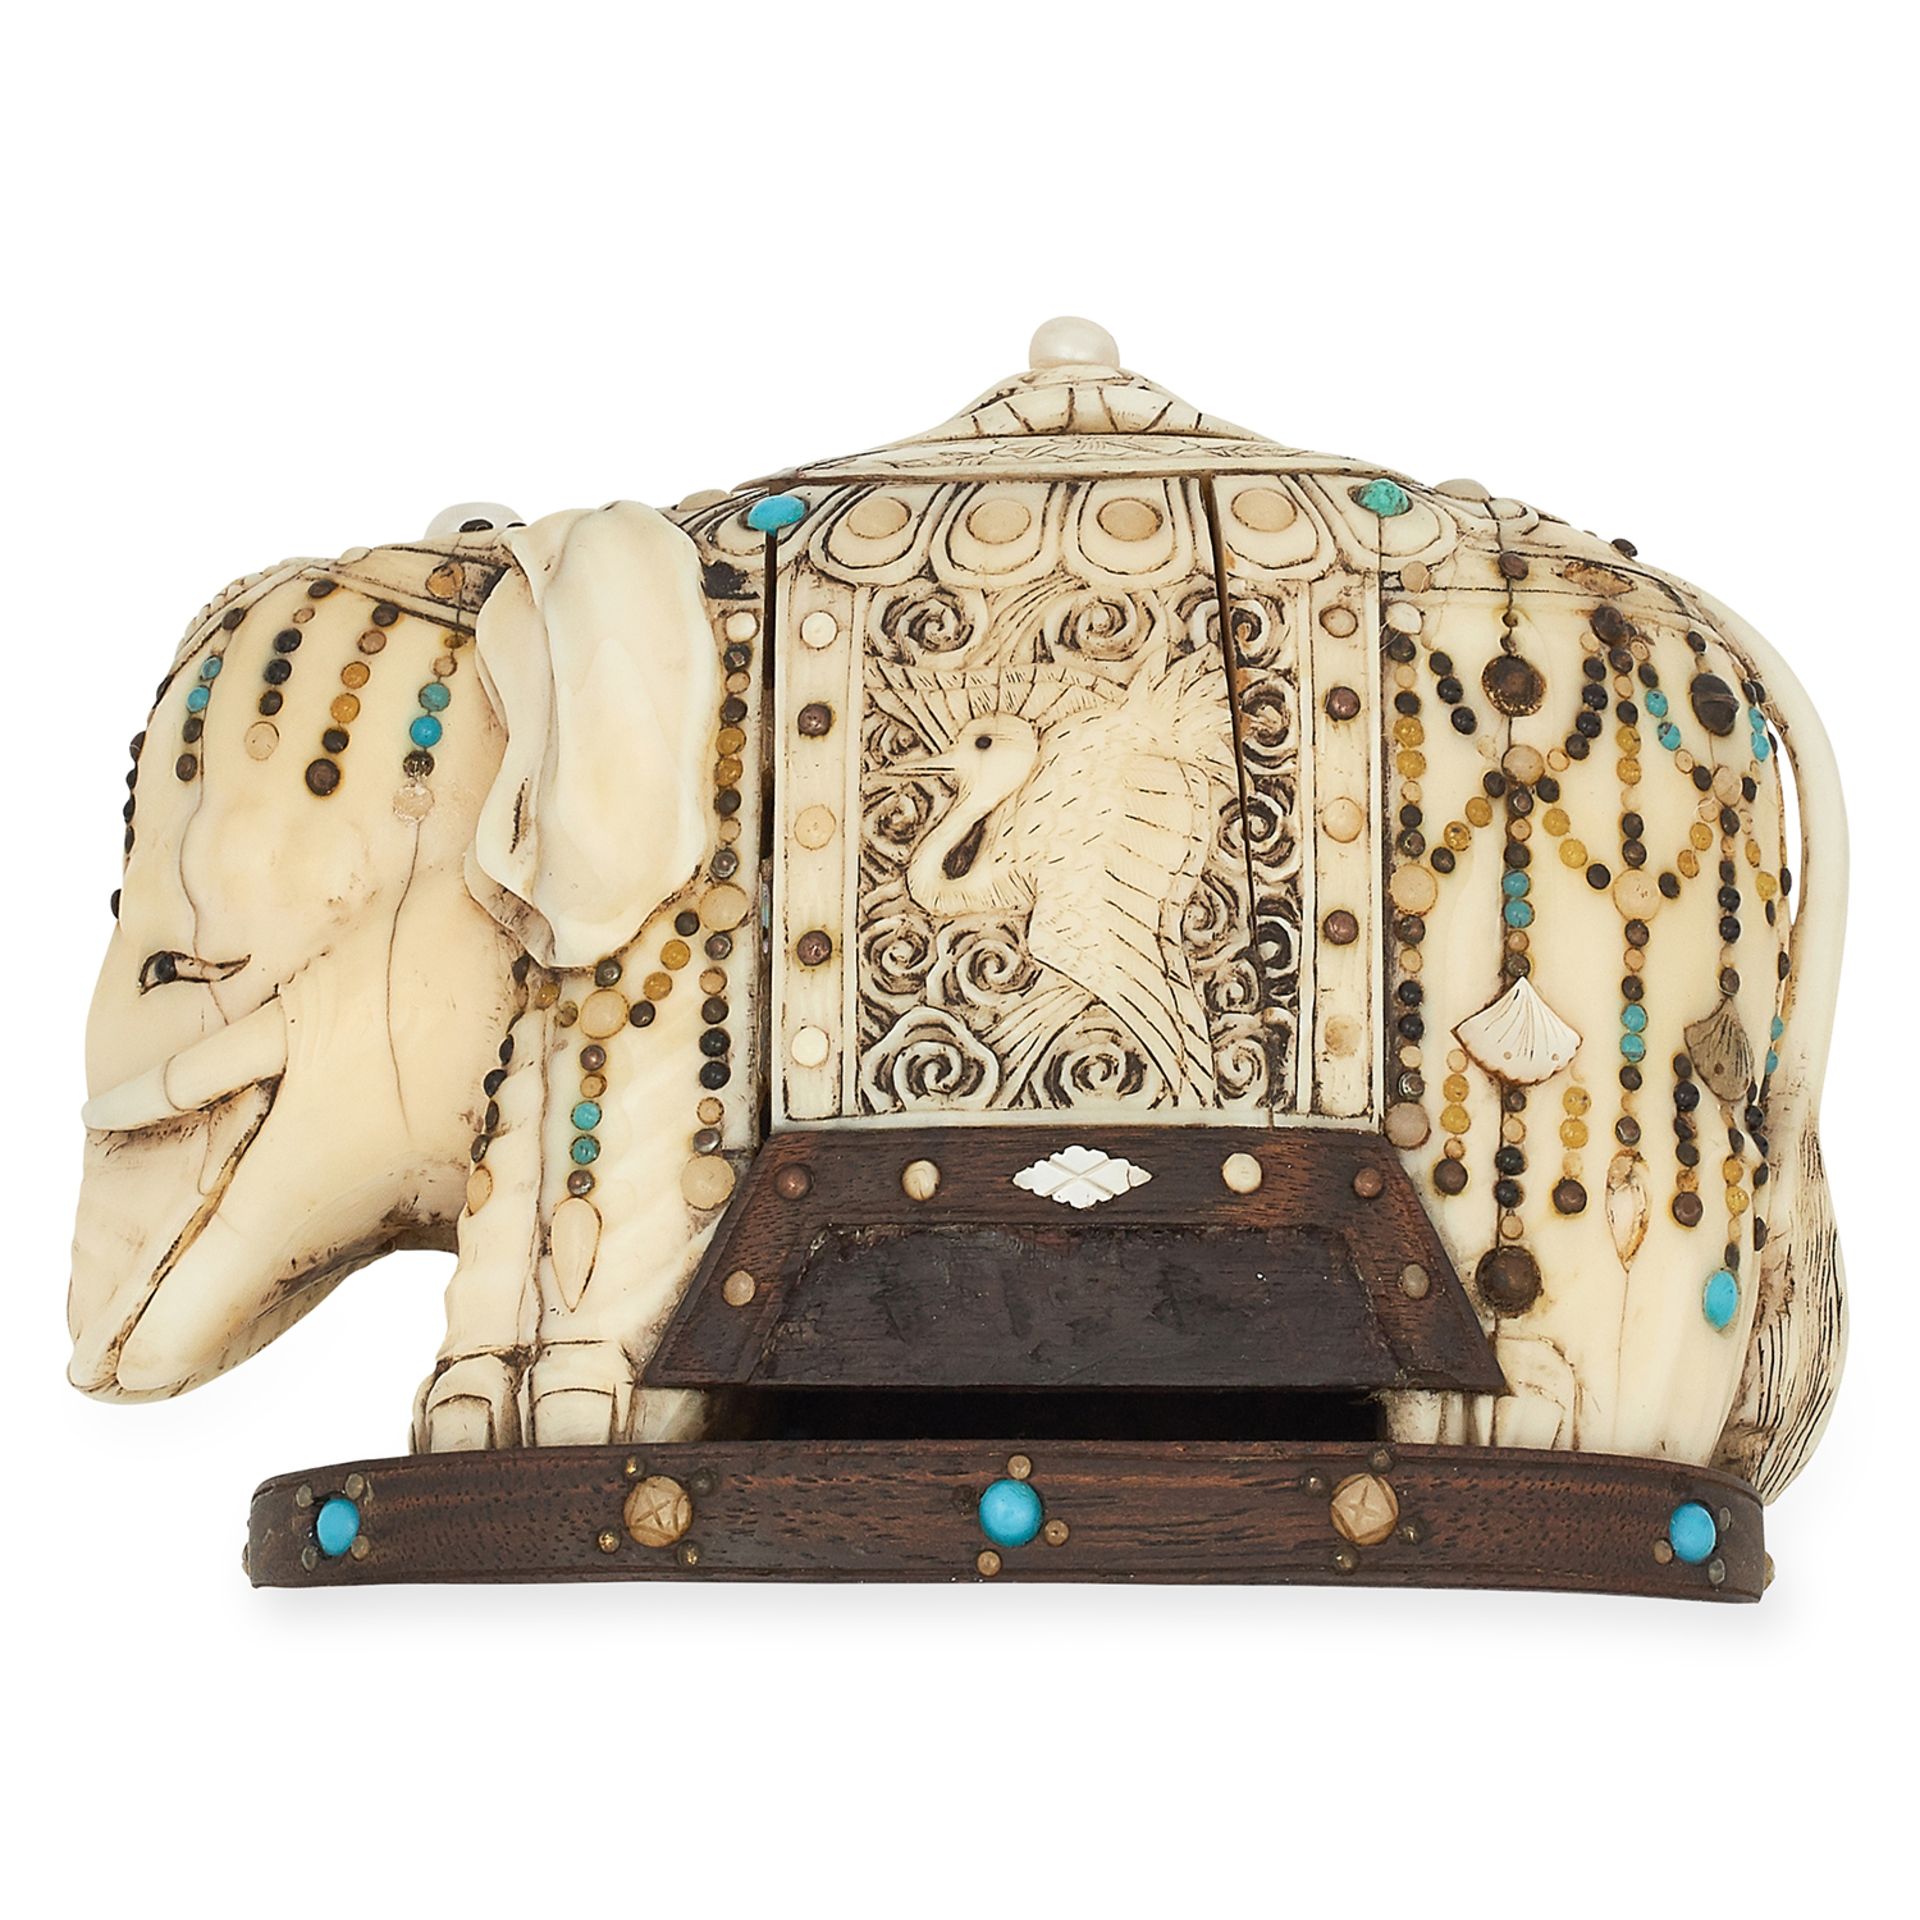 ANTIQUE MUGHAL IVORY GEMSET ELEPHANT STATUE with decorated detailing, 11cm, 334.7g.